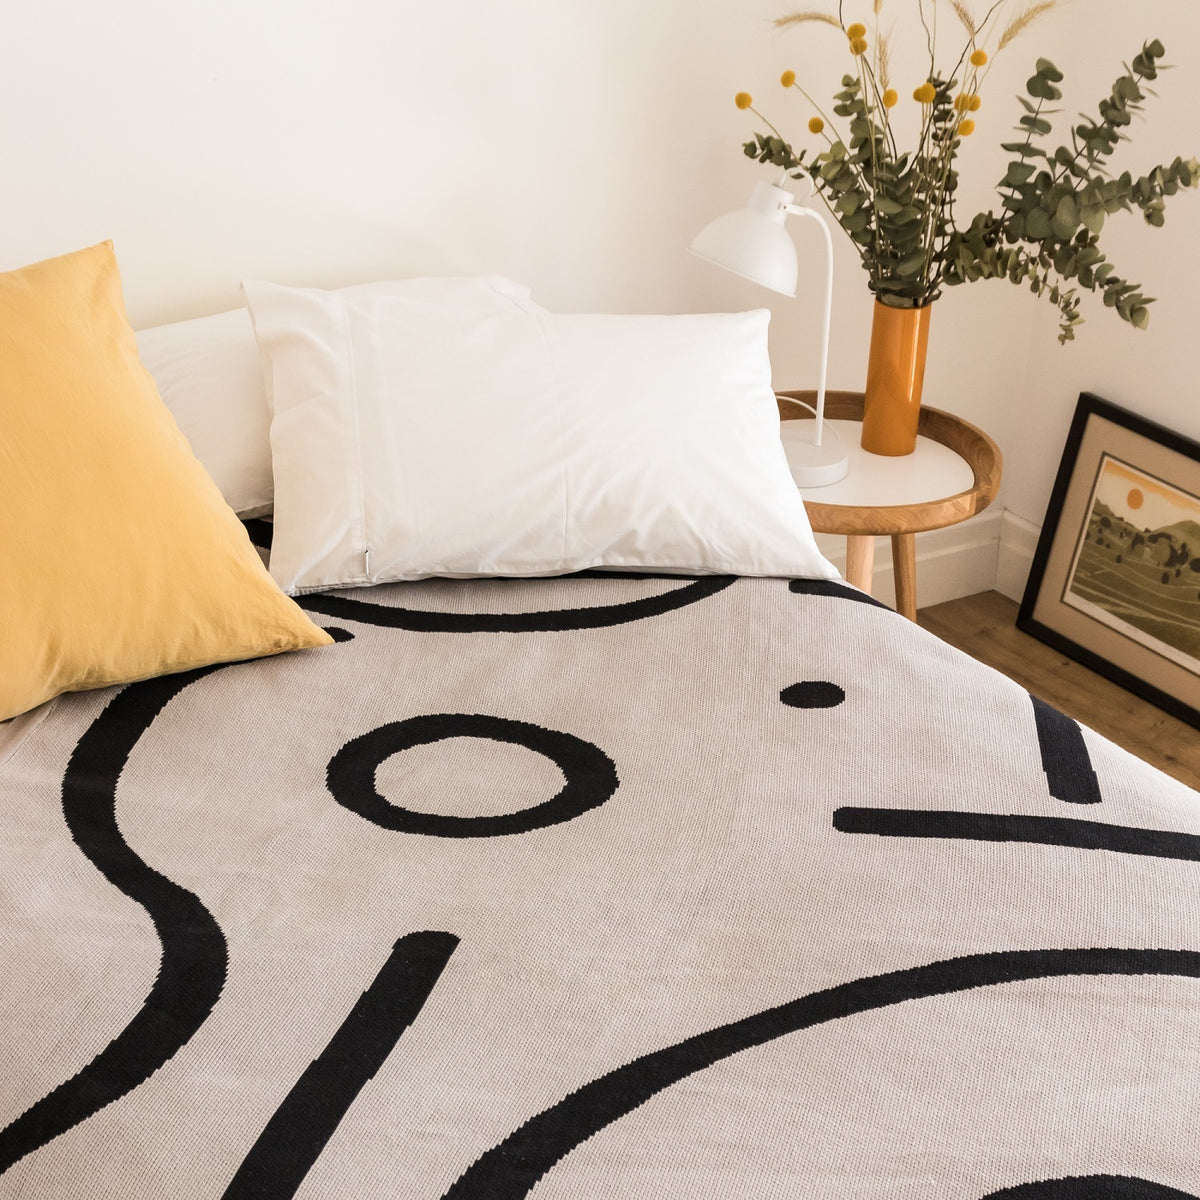 Artist Designed Blanket - City Shapes x Tara Deacon by Something Good Studio - Always Welcome Store